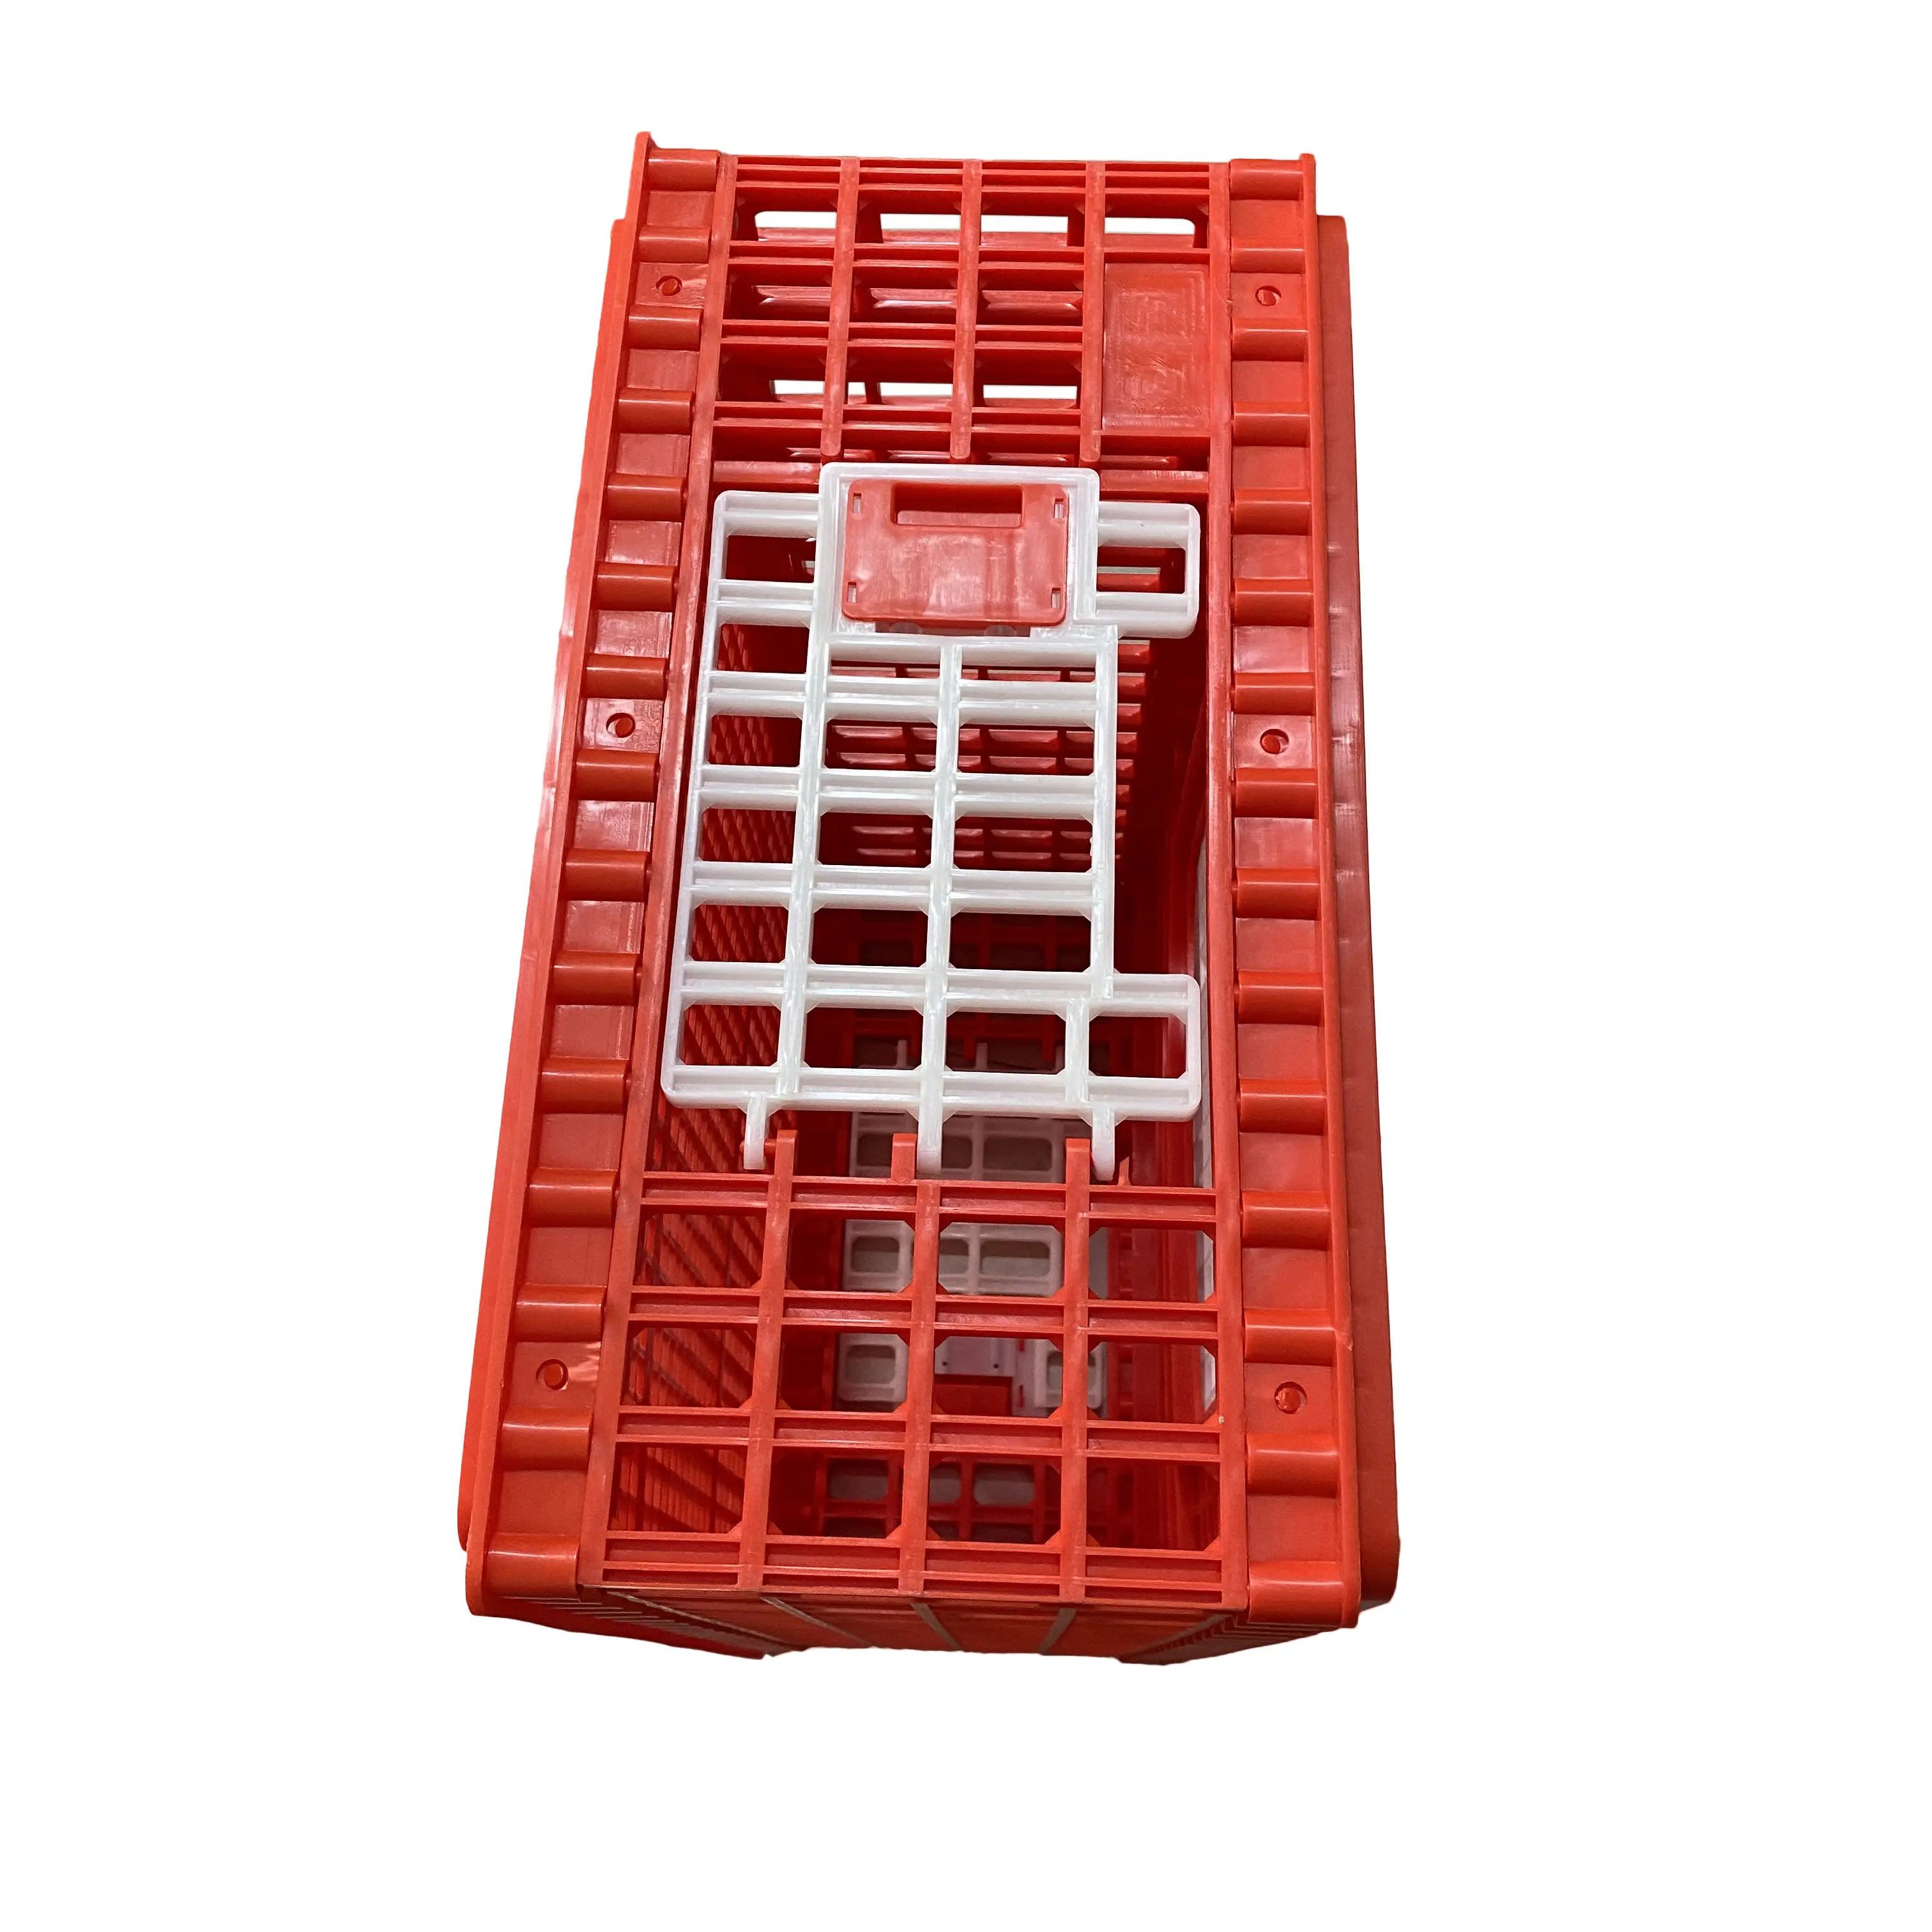 LMC 02 Poultry Equipments Plastic Poultry Carrier Transport Crate Three Doors Chicken Transport Cage